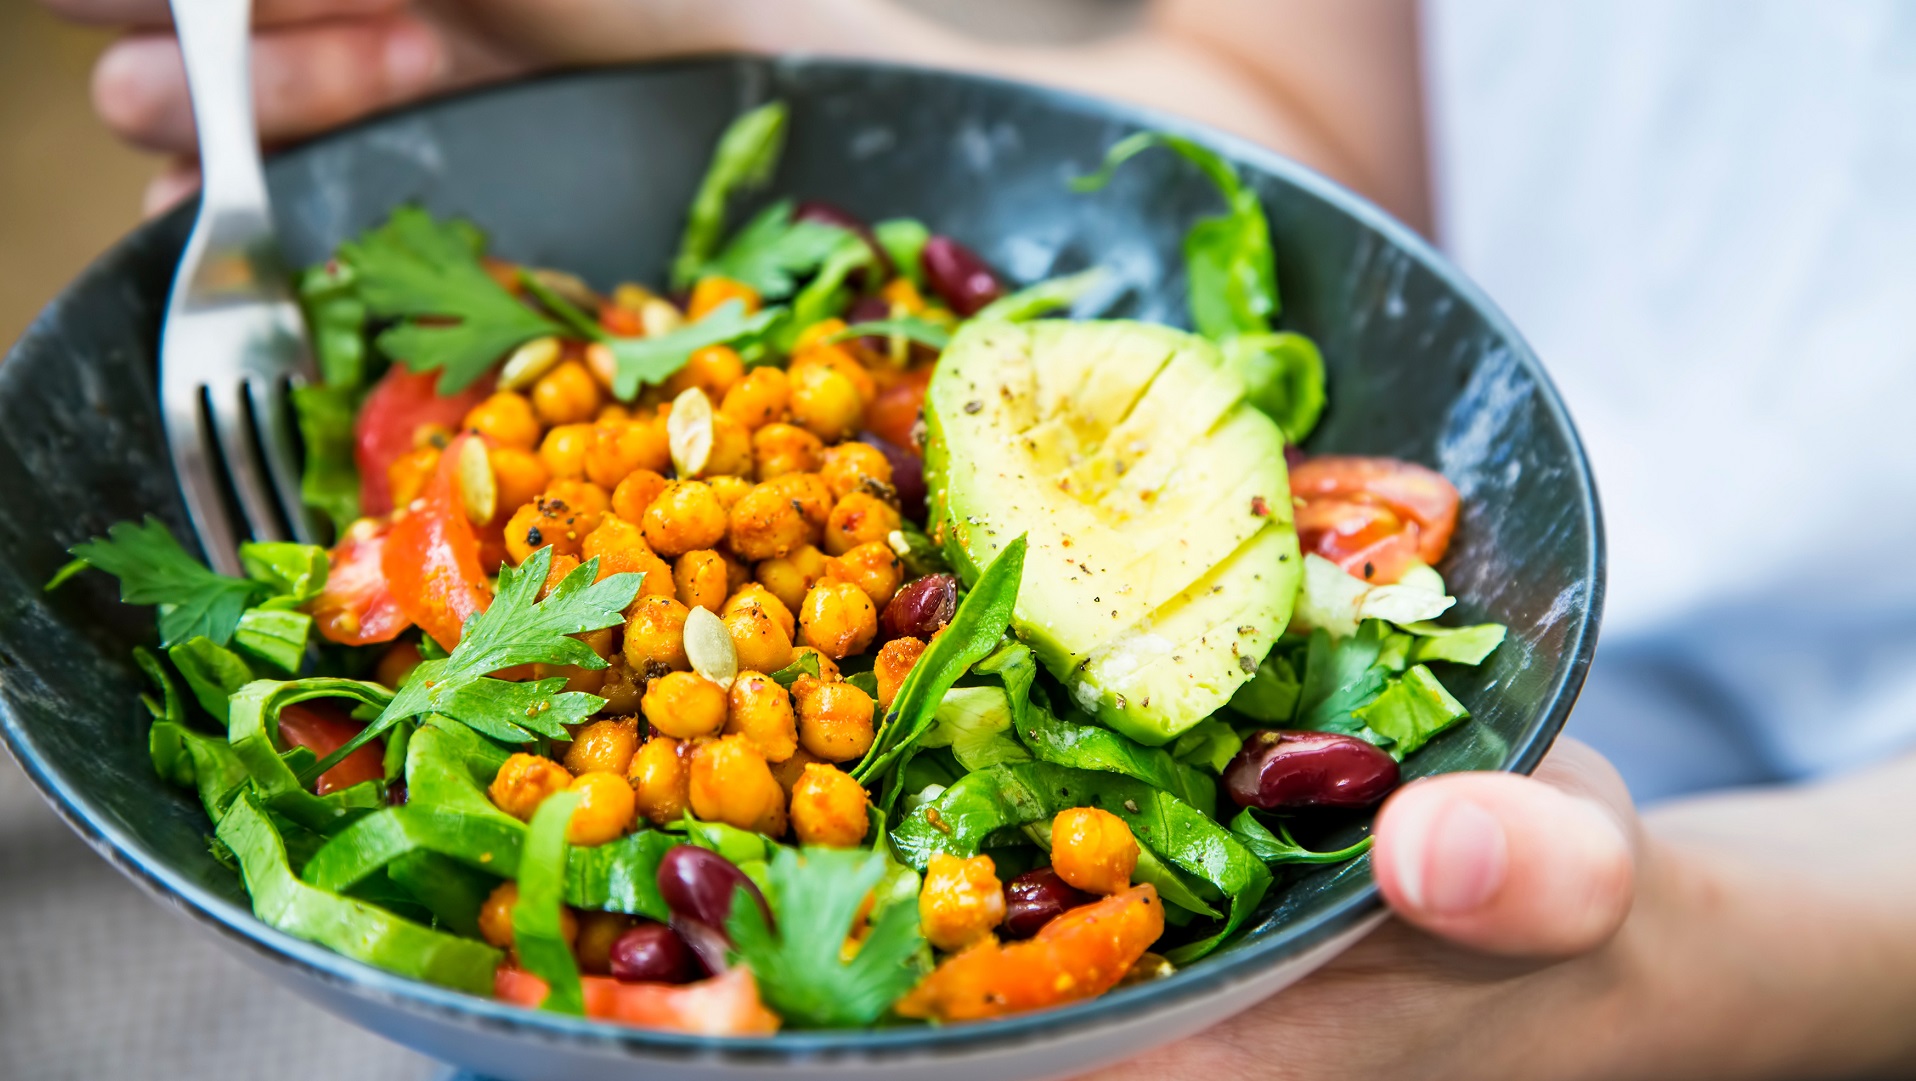 Datassential, the leading food and beverage insights platform, announced its new tool feature focused on capturing plant-based foods on menus